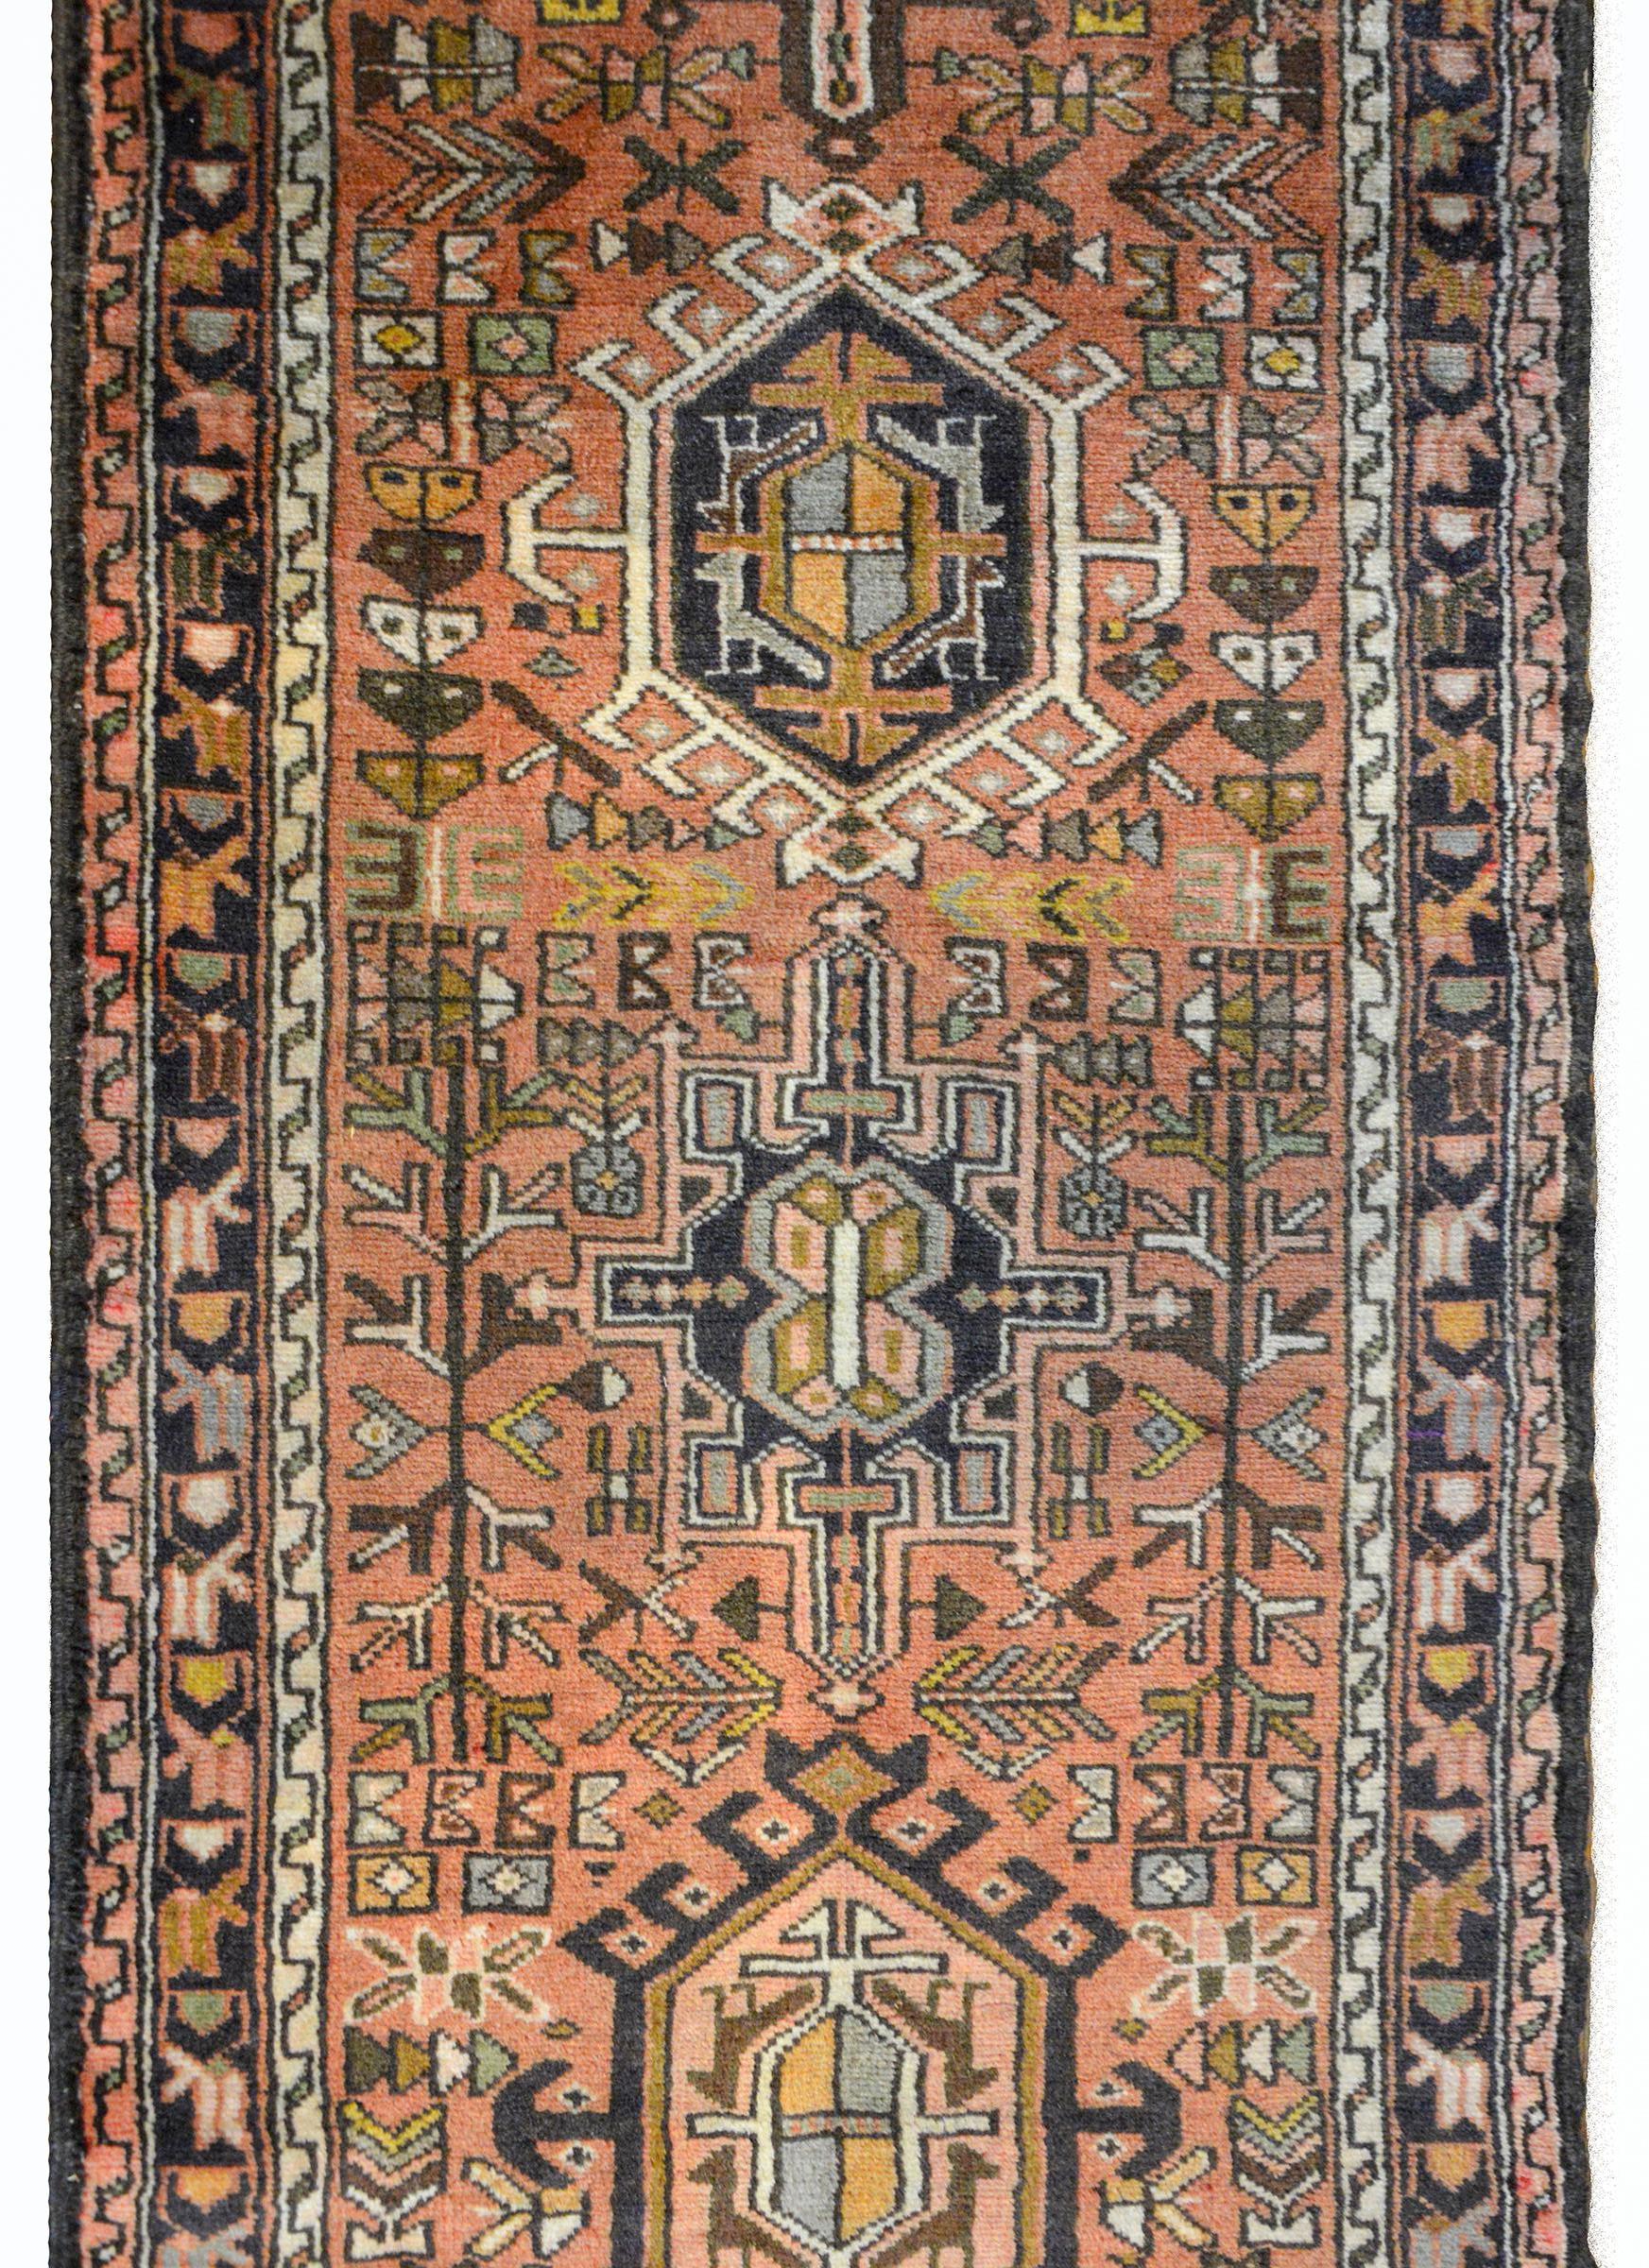 A wonderful mid-20th century Persian Karadja runner with several stylized floral medallions woven in myriad colors including brown, coral, pink, white, gold, and black, amidst a field of more stylized flowers against a coral background. The border